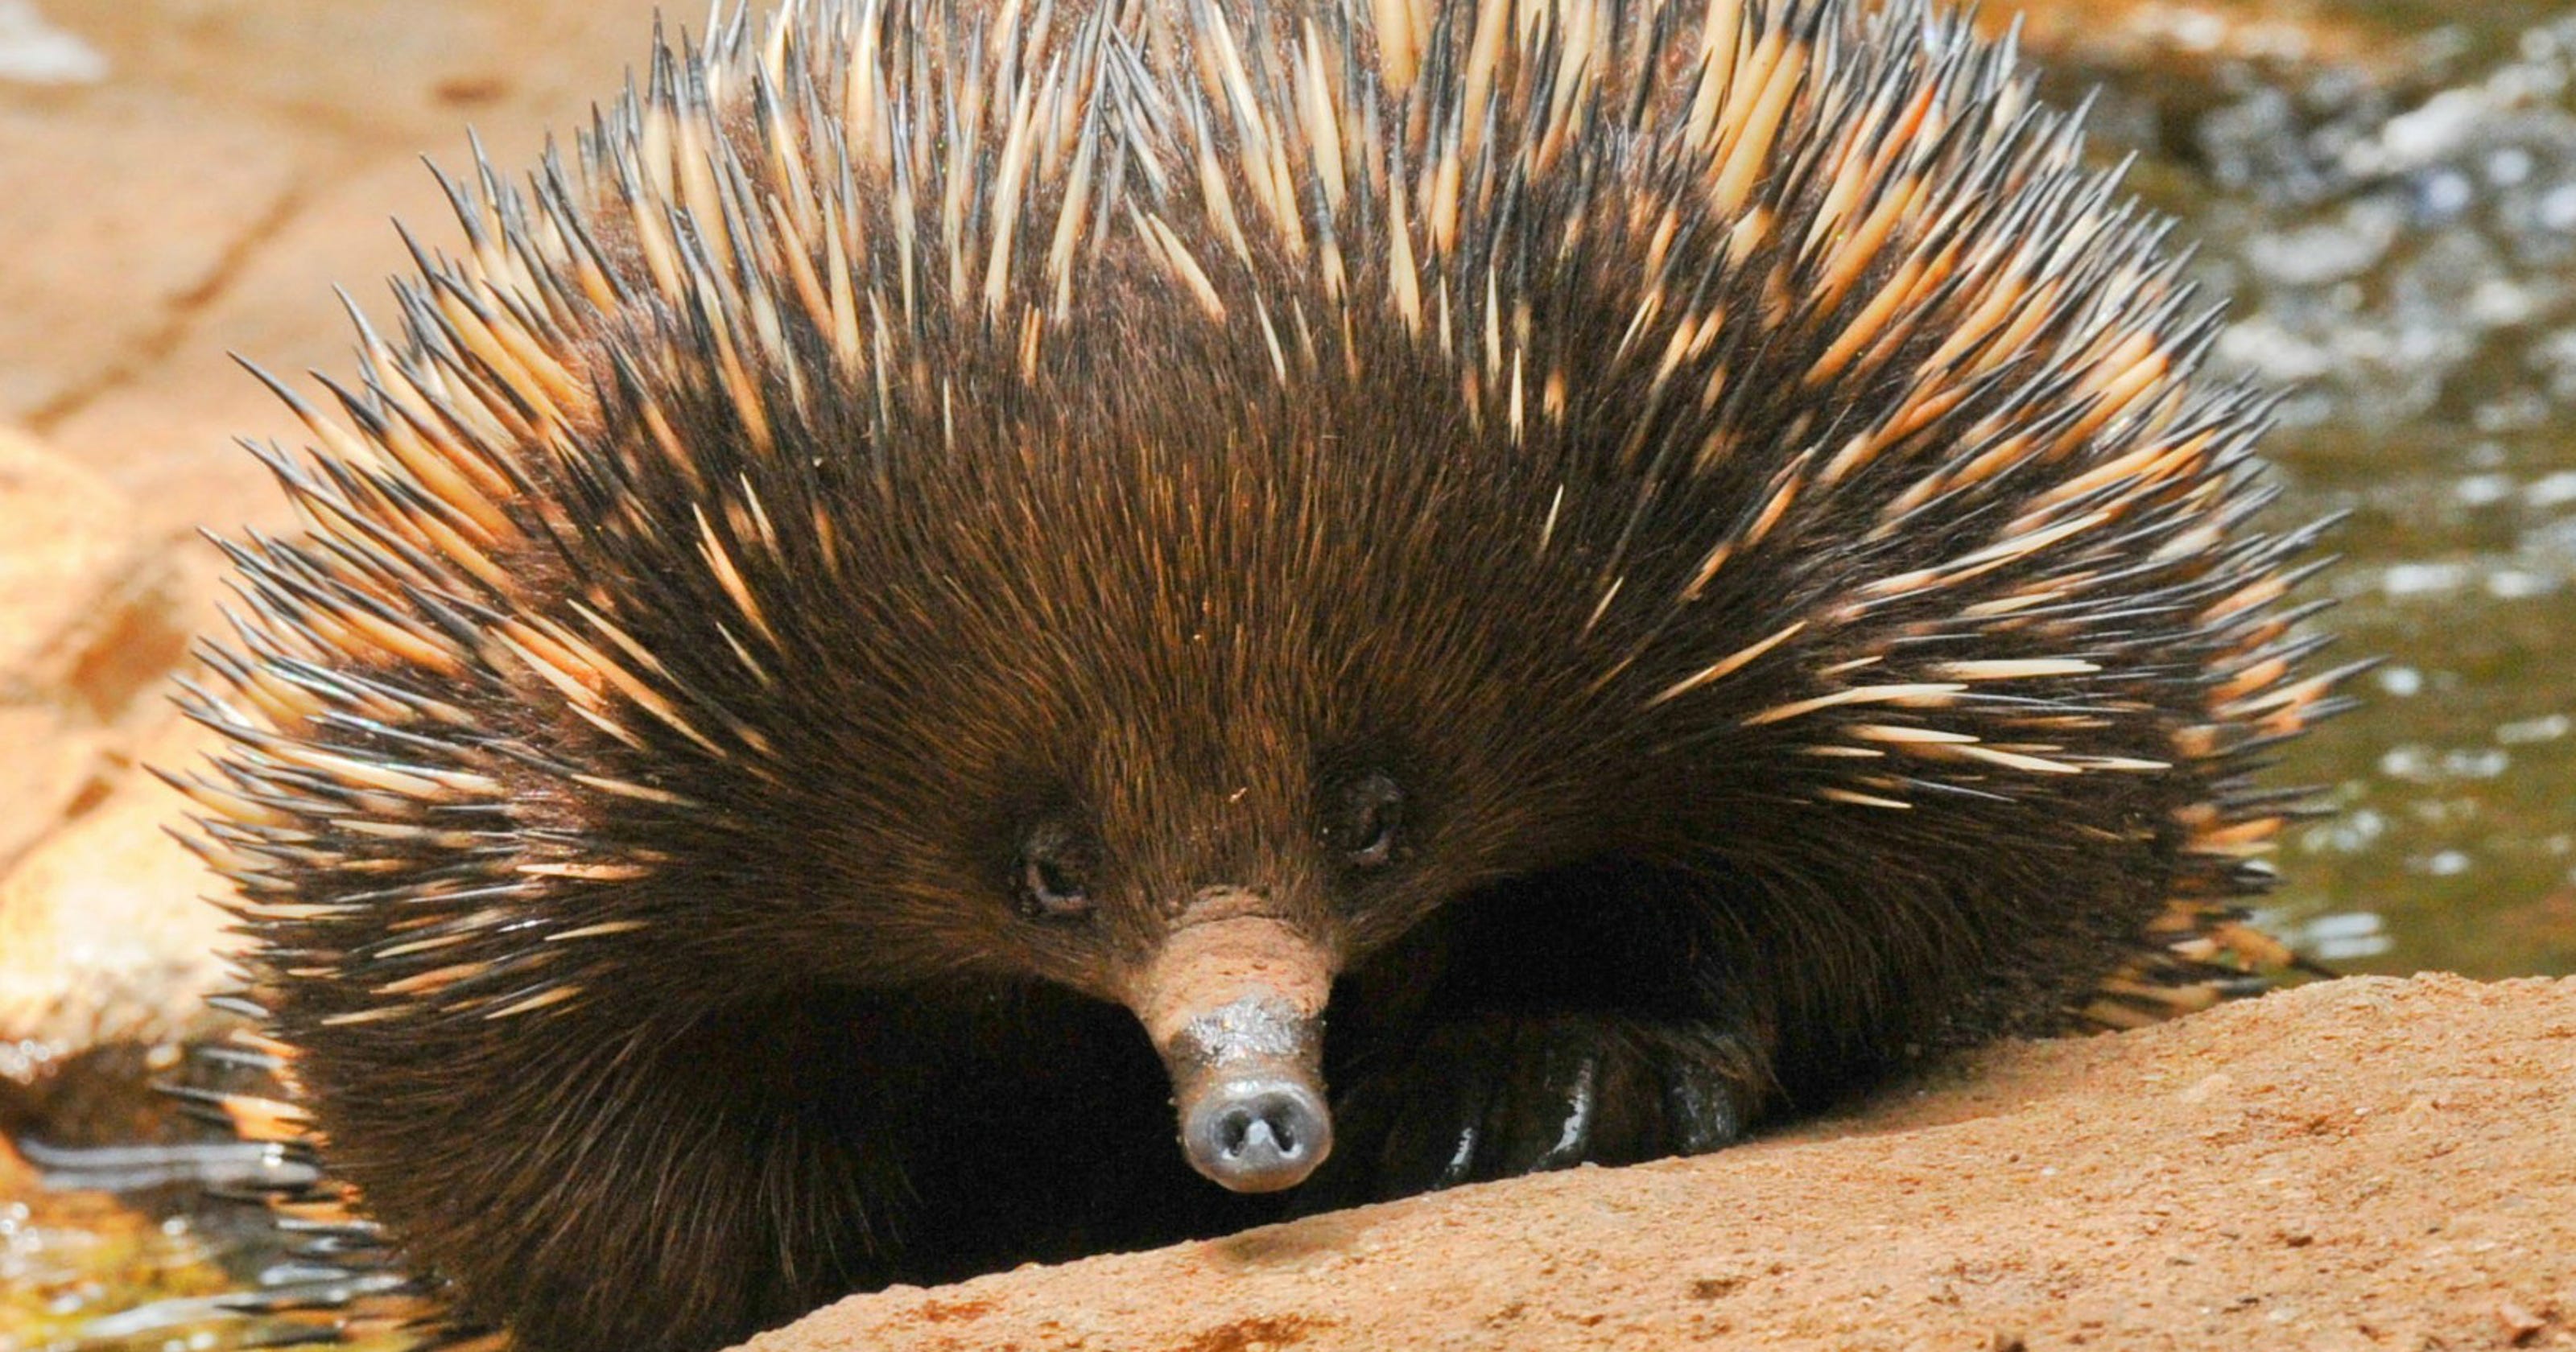 Cool critters Australia s echidnas  shed light on fireproofing